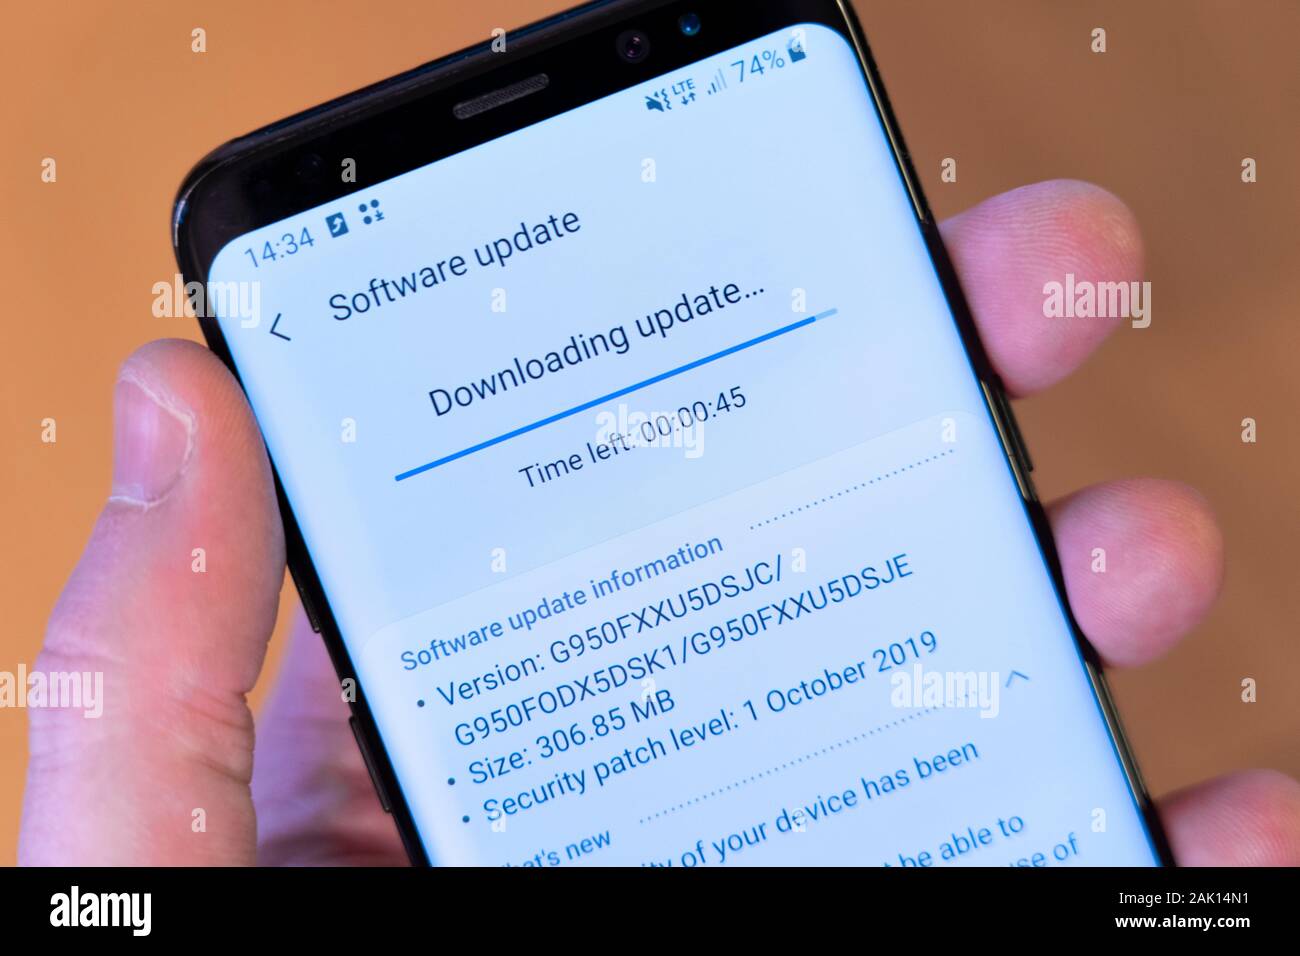 A Galaxy S8 smartphone held in a man's hand and downloading an Android operating system update and security patch Stock Photo